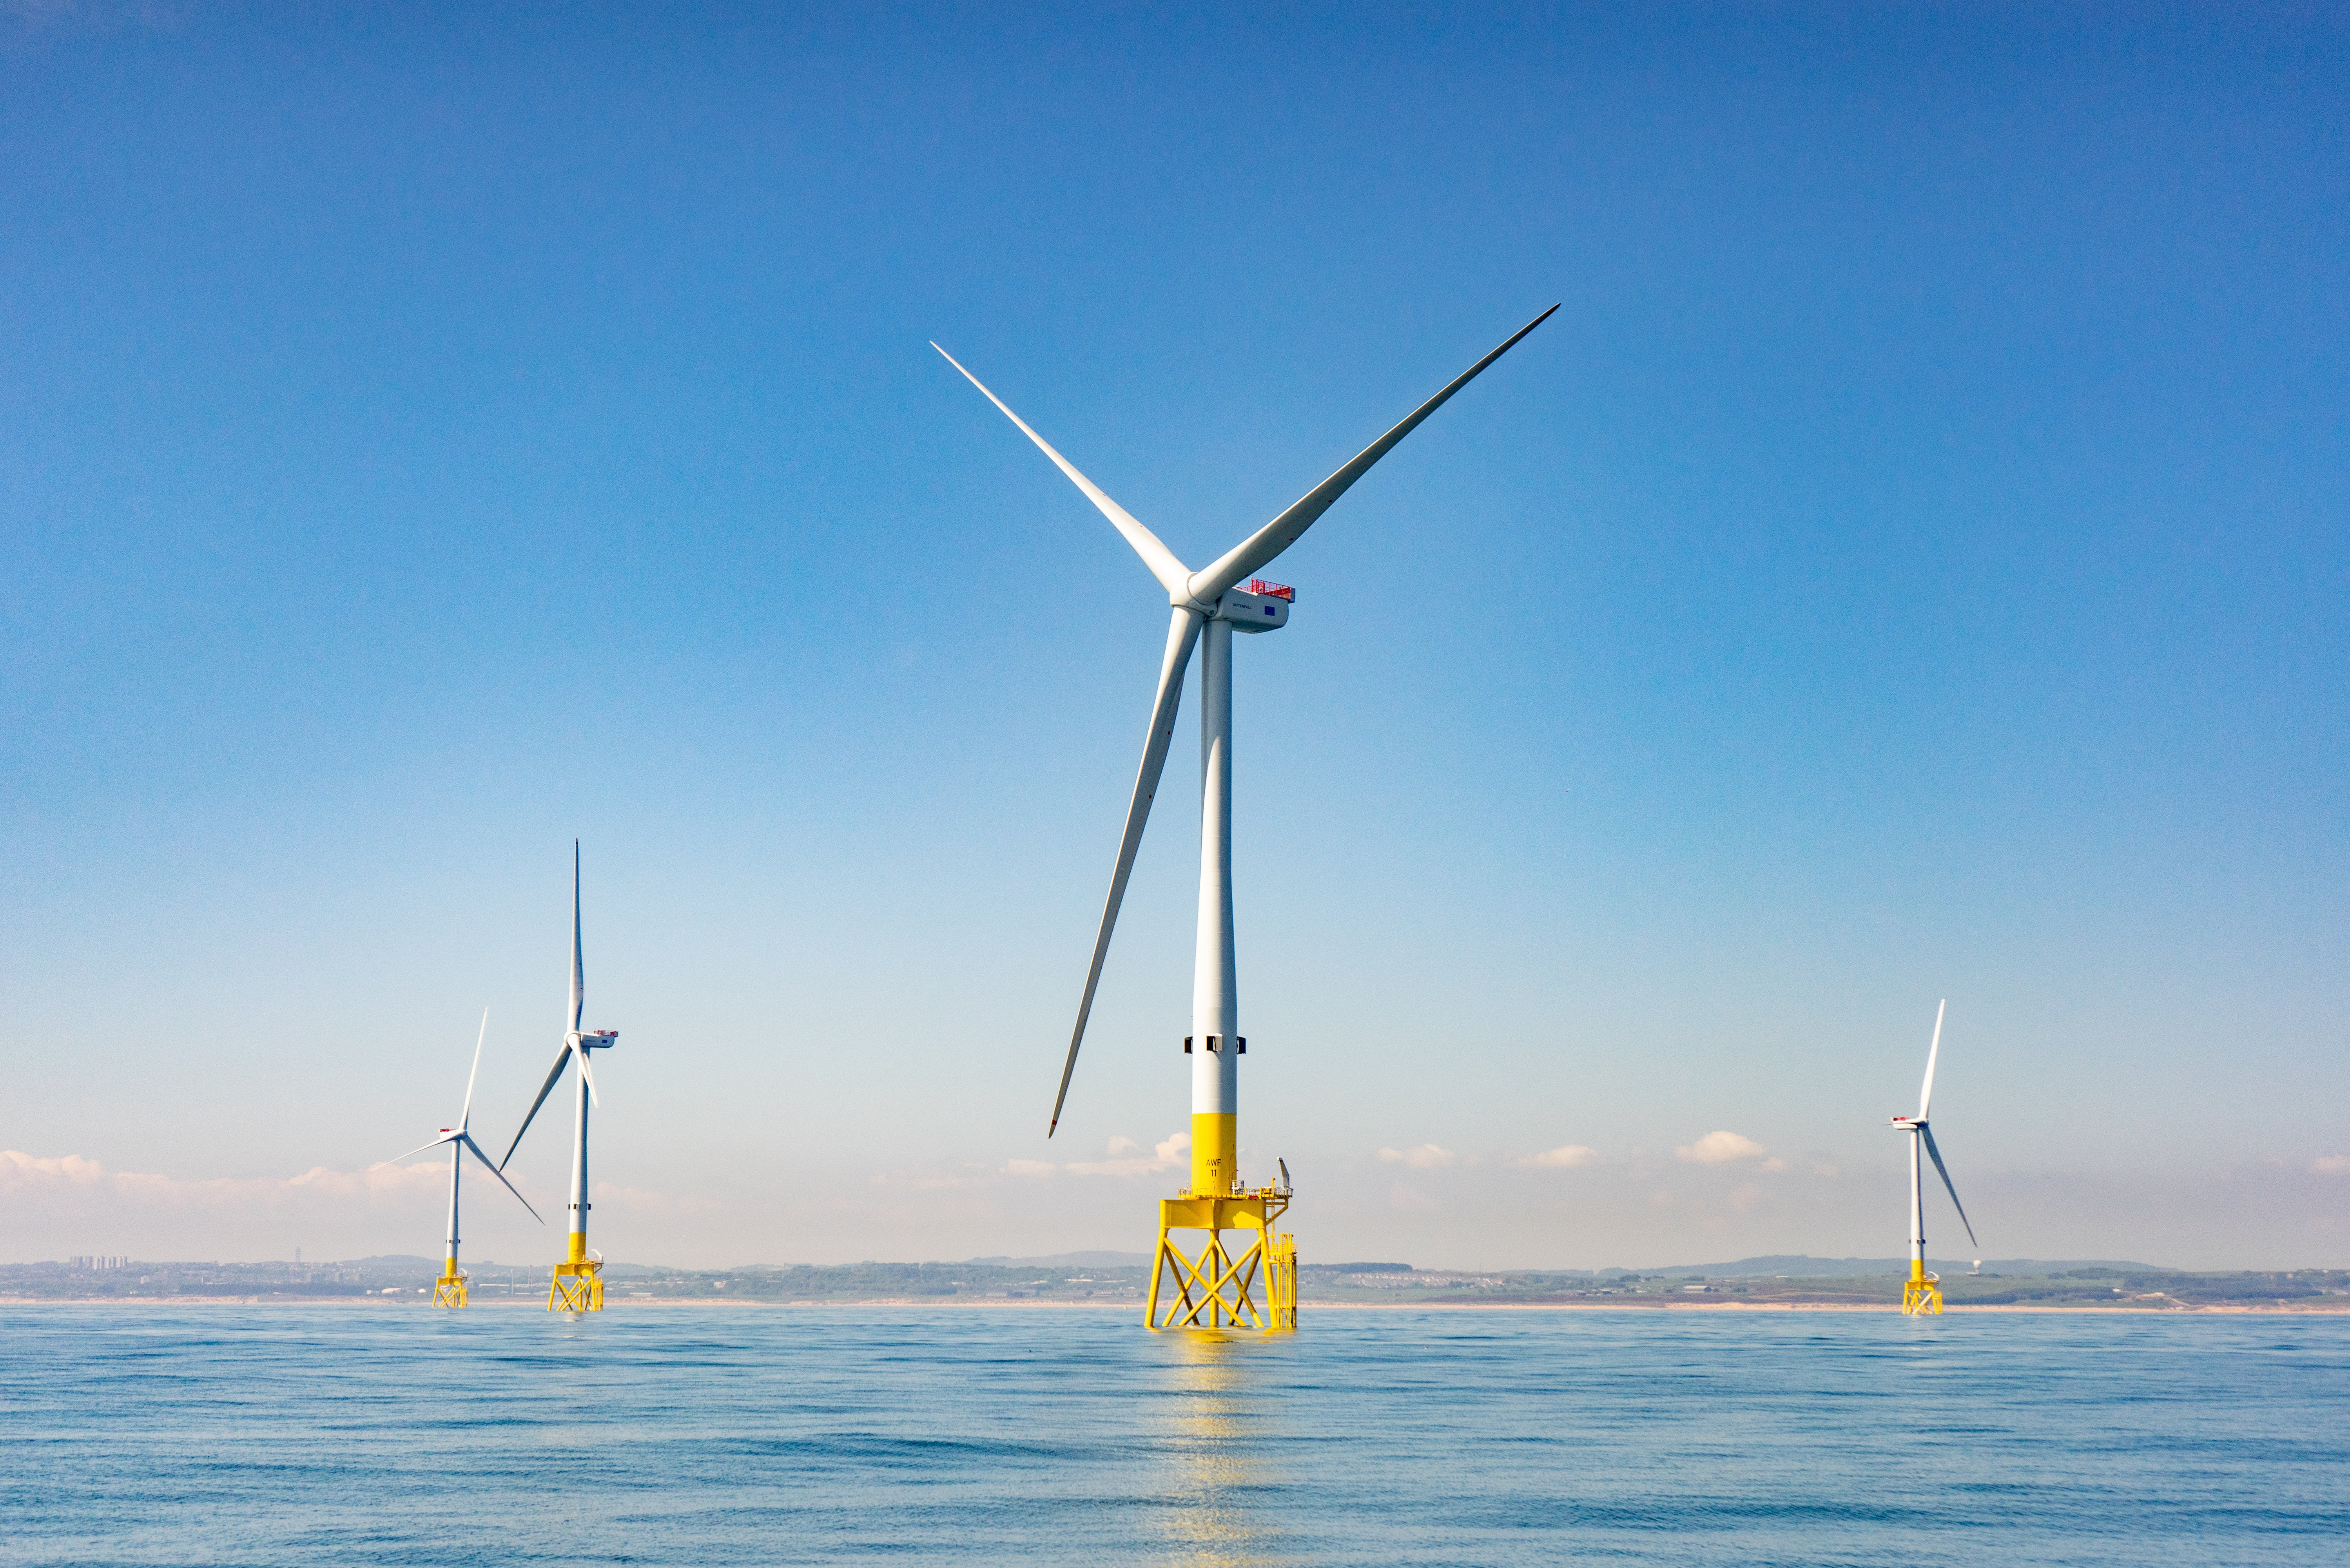 Britain’s offshore wind industry will ultimately cut bills for consumers